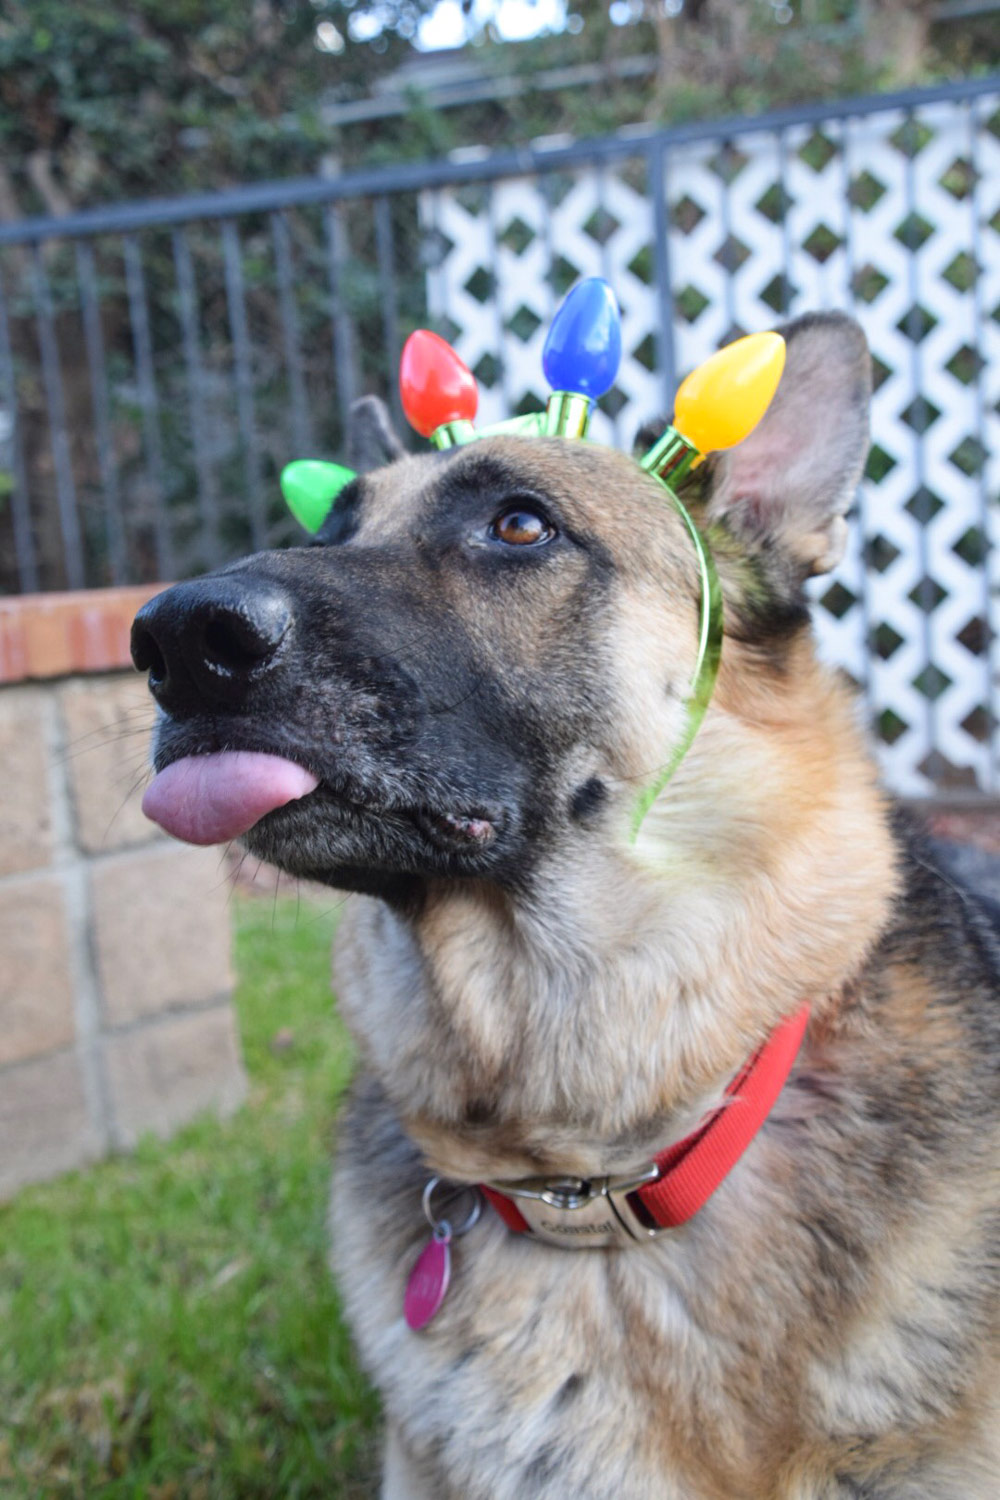 Doris H. sent a picture of her adorable six-year-old German Shepherd Ziva, wearing a headband of festive Christmas lights while being silly with her tongue sticking out!